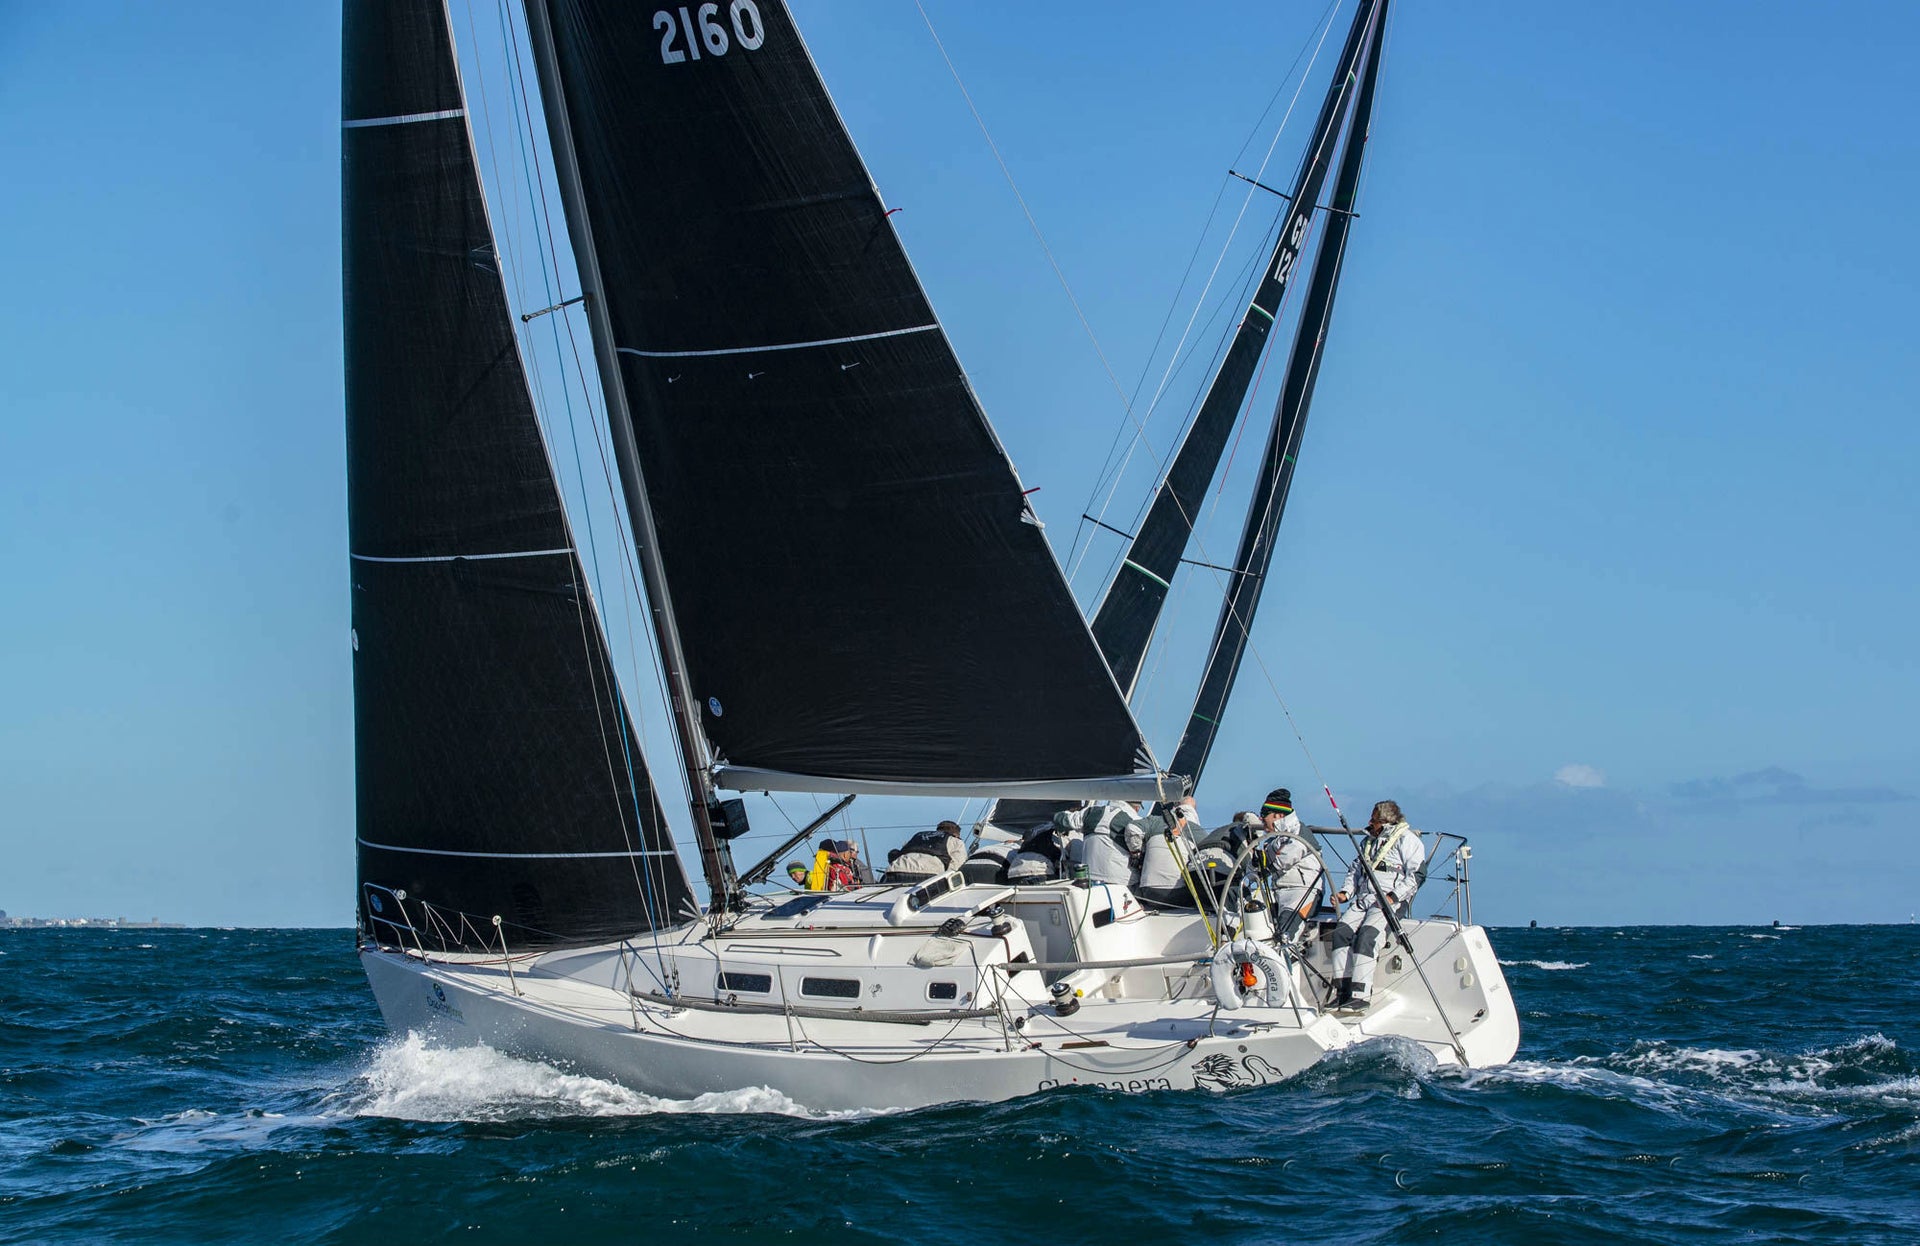 2019 - A MEMORABLE YEAR FOR NORTH SAILS IRELAND